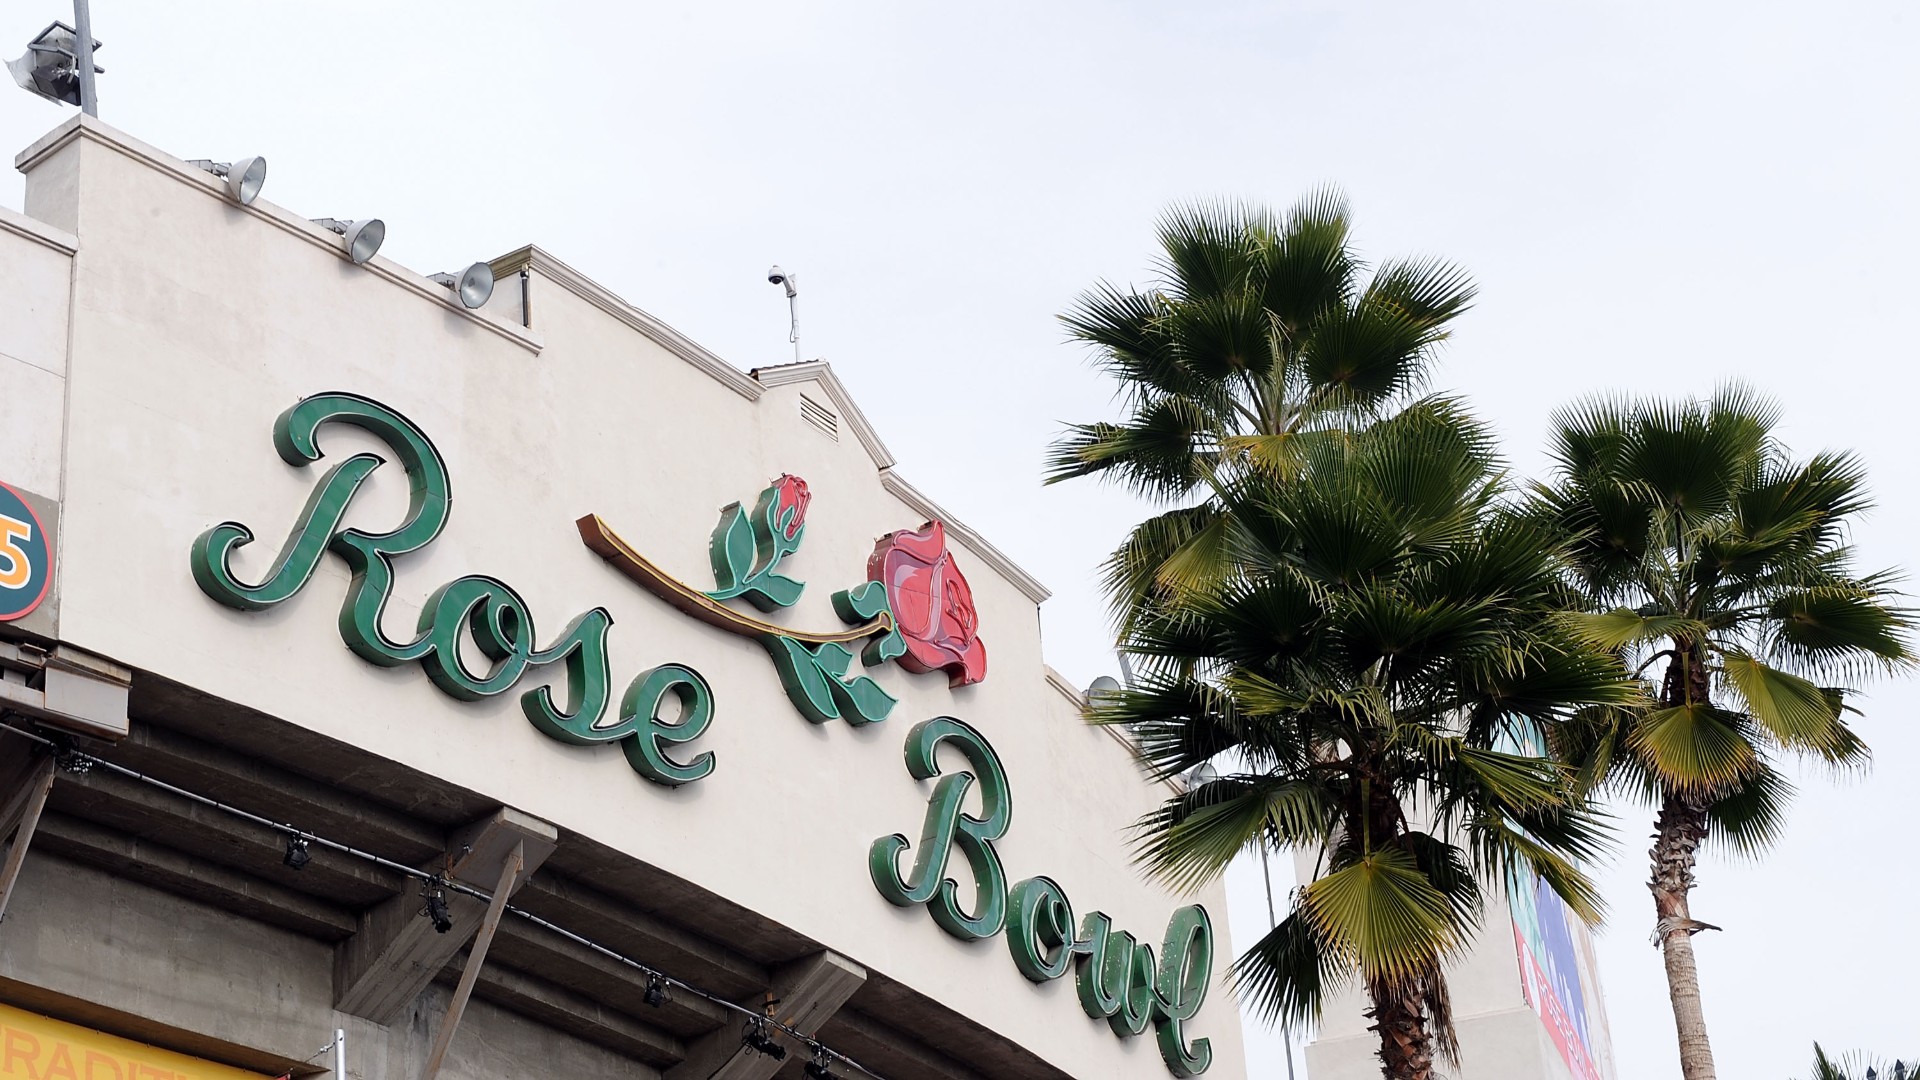 An exterior view of the 96th Rose Bowl game in Pasadena between the Oregon Ducks and the Ohio State Buckeyes on Jan. 1, 2010. (Harry How/Getty Images)